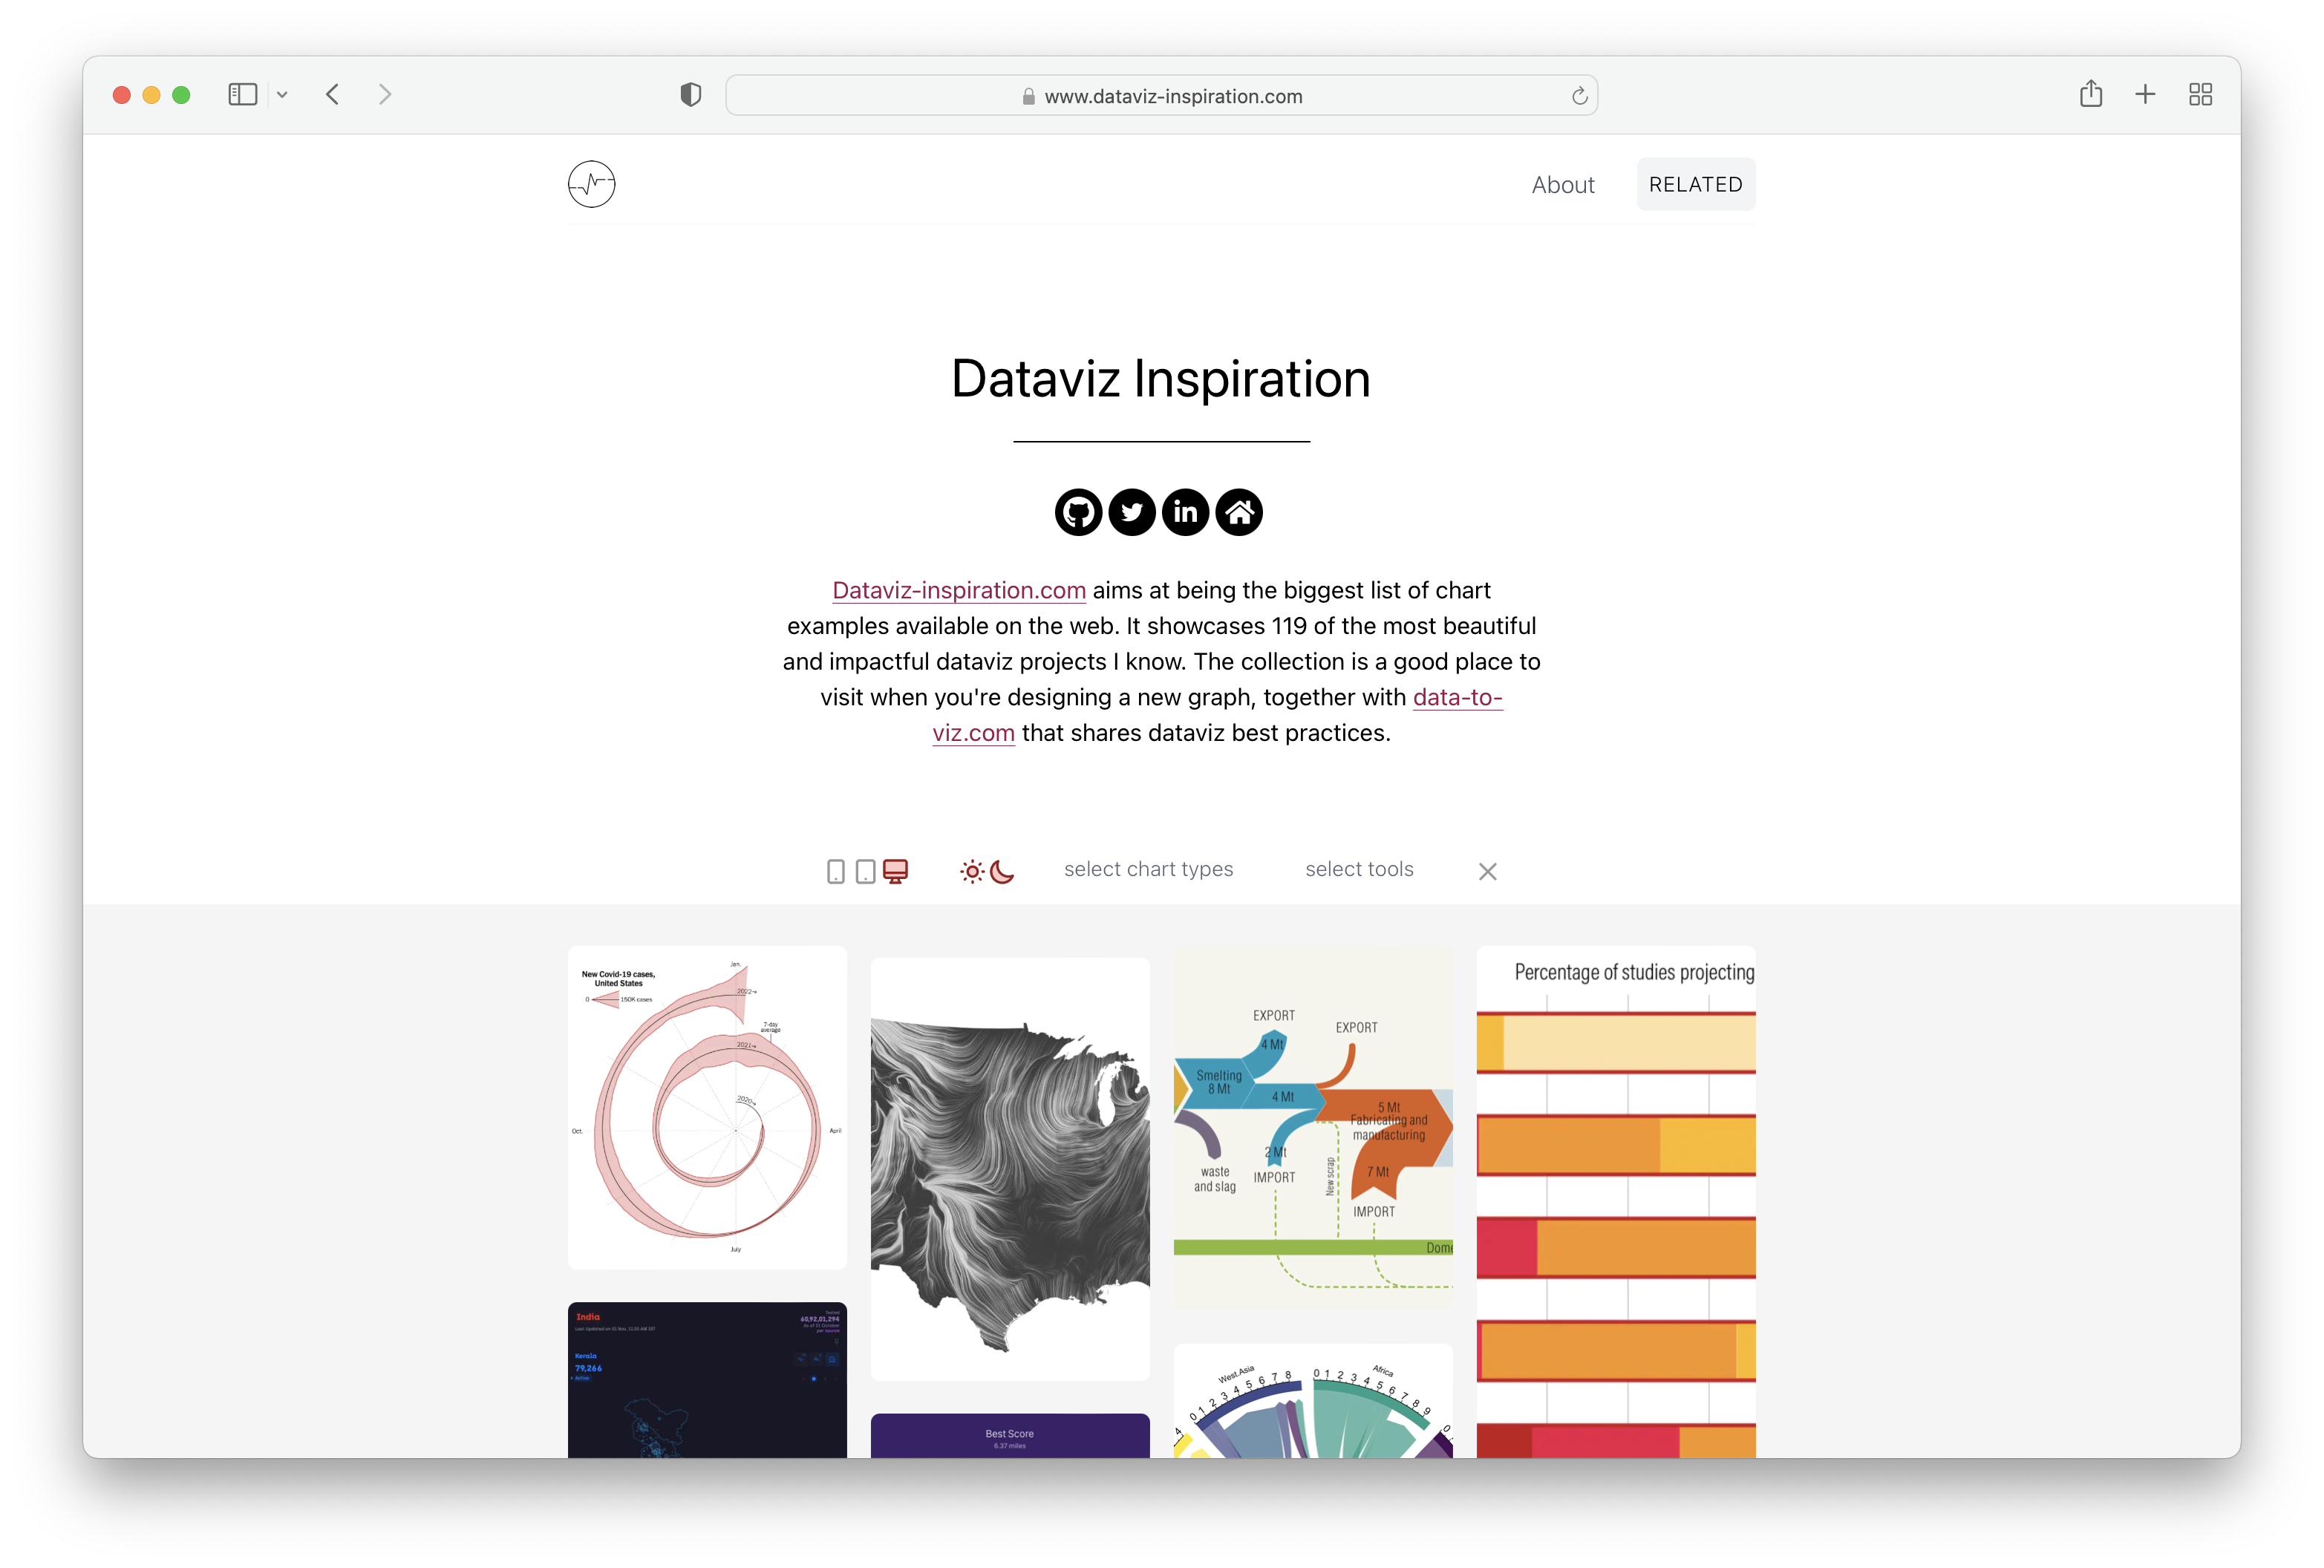 A browser window showing the dataviz-inspiration.com home page